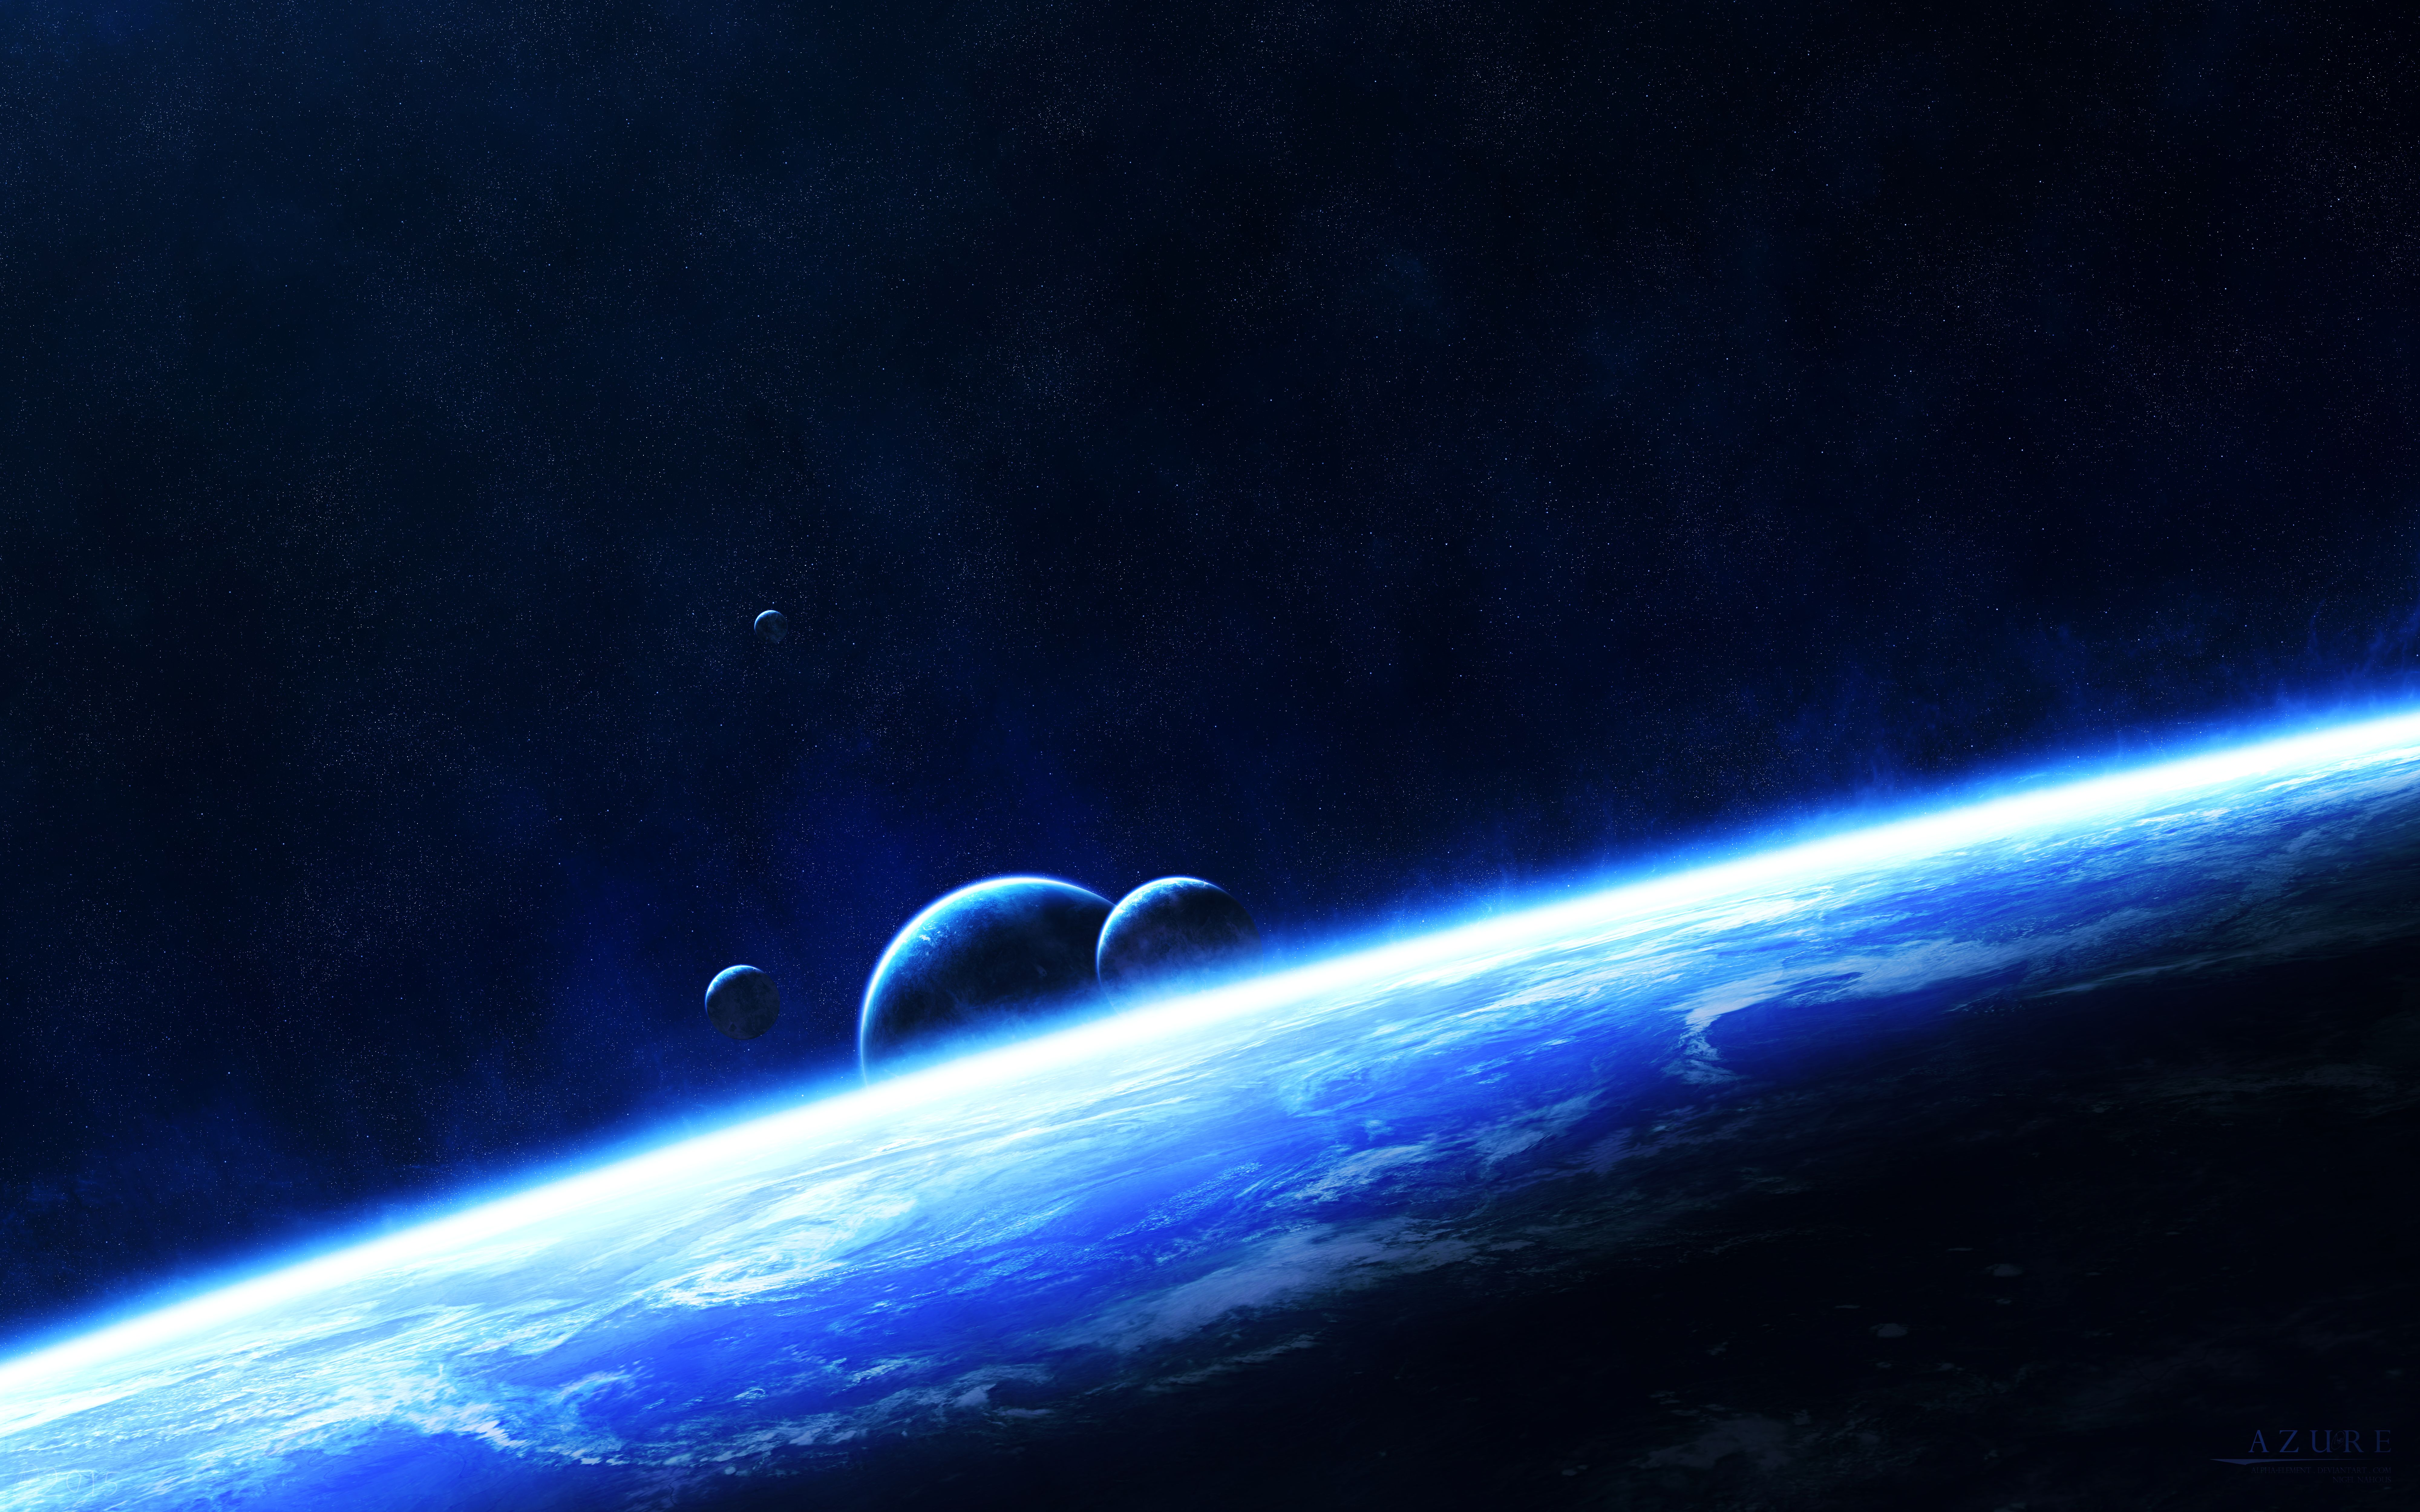 92105 download wallpaper planets, universe, glow screensavers and pictures for free